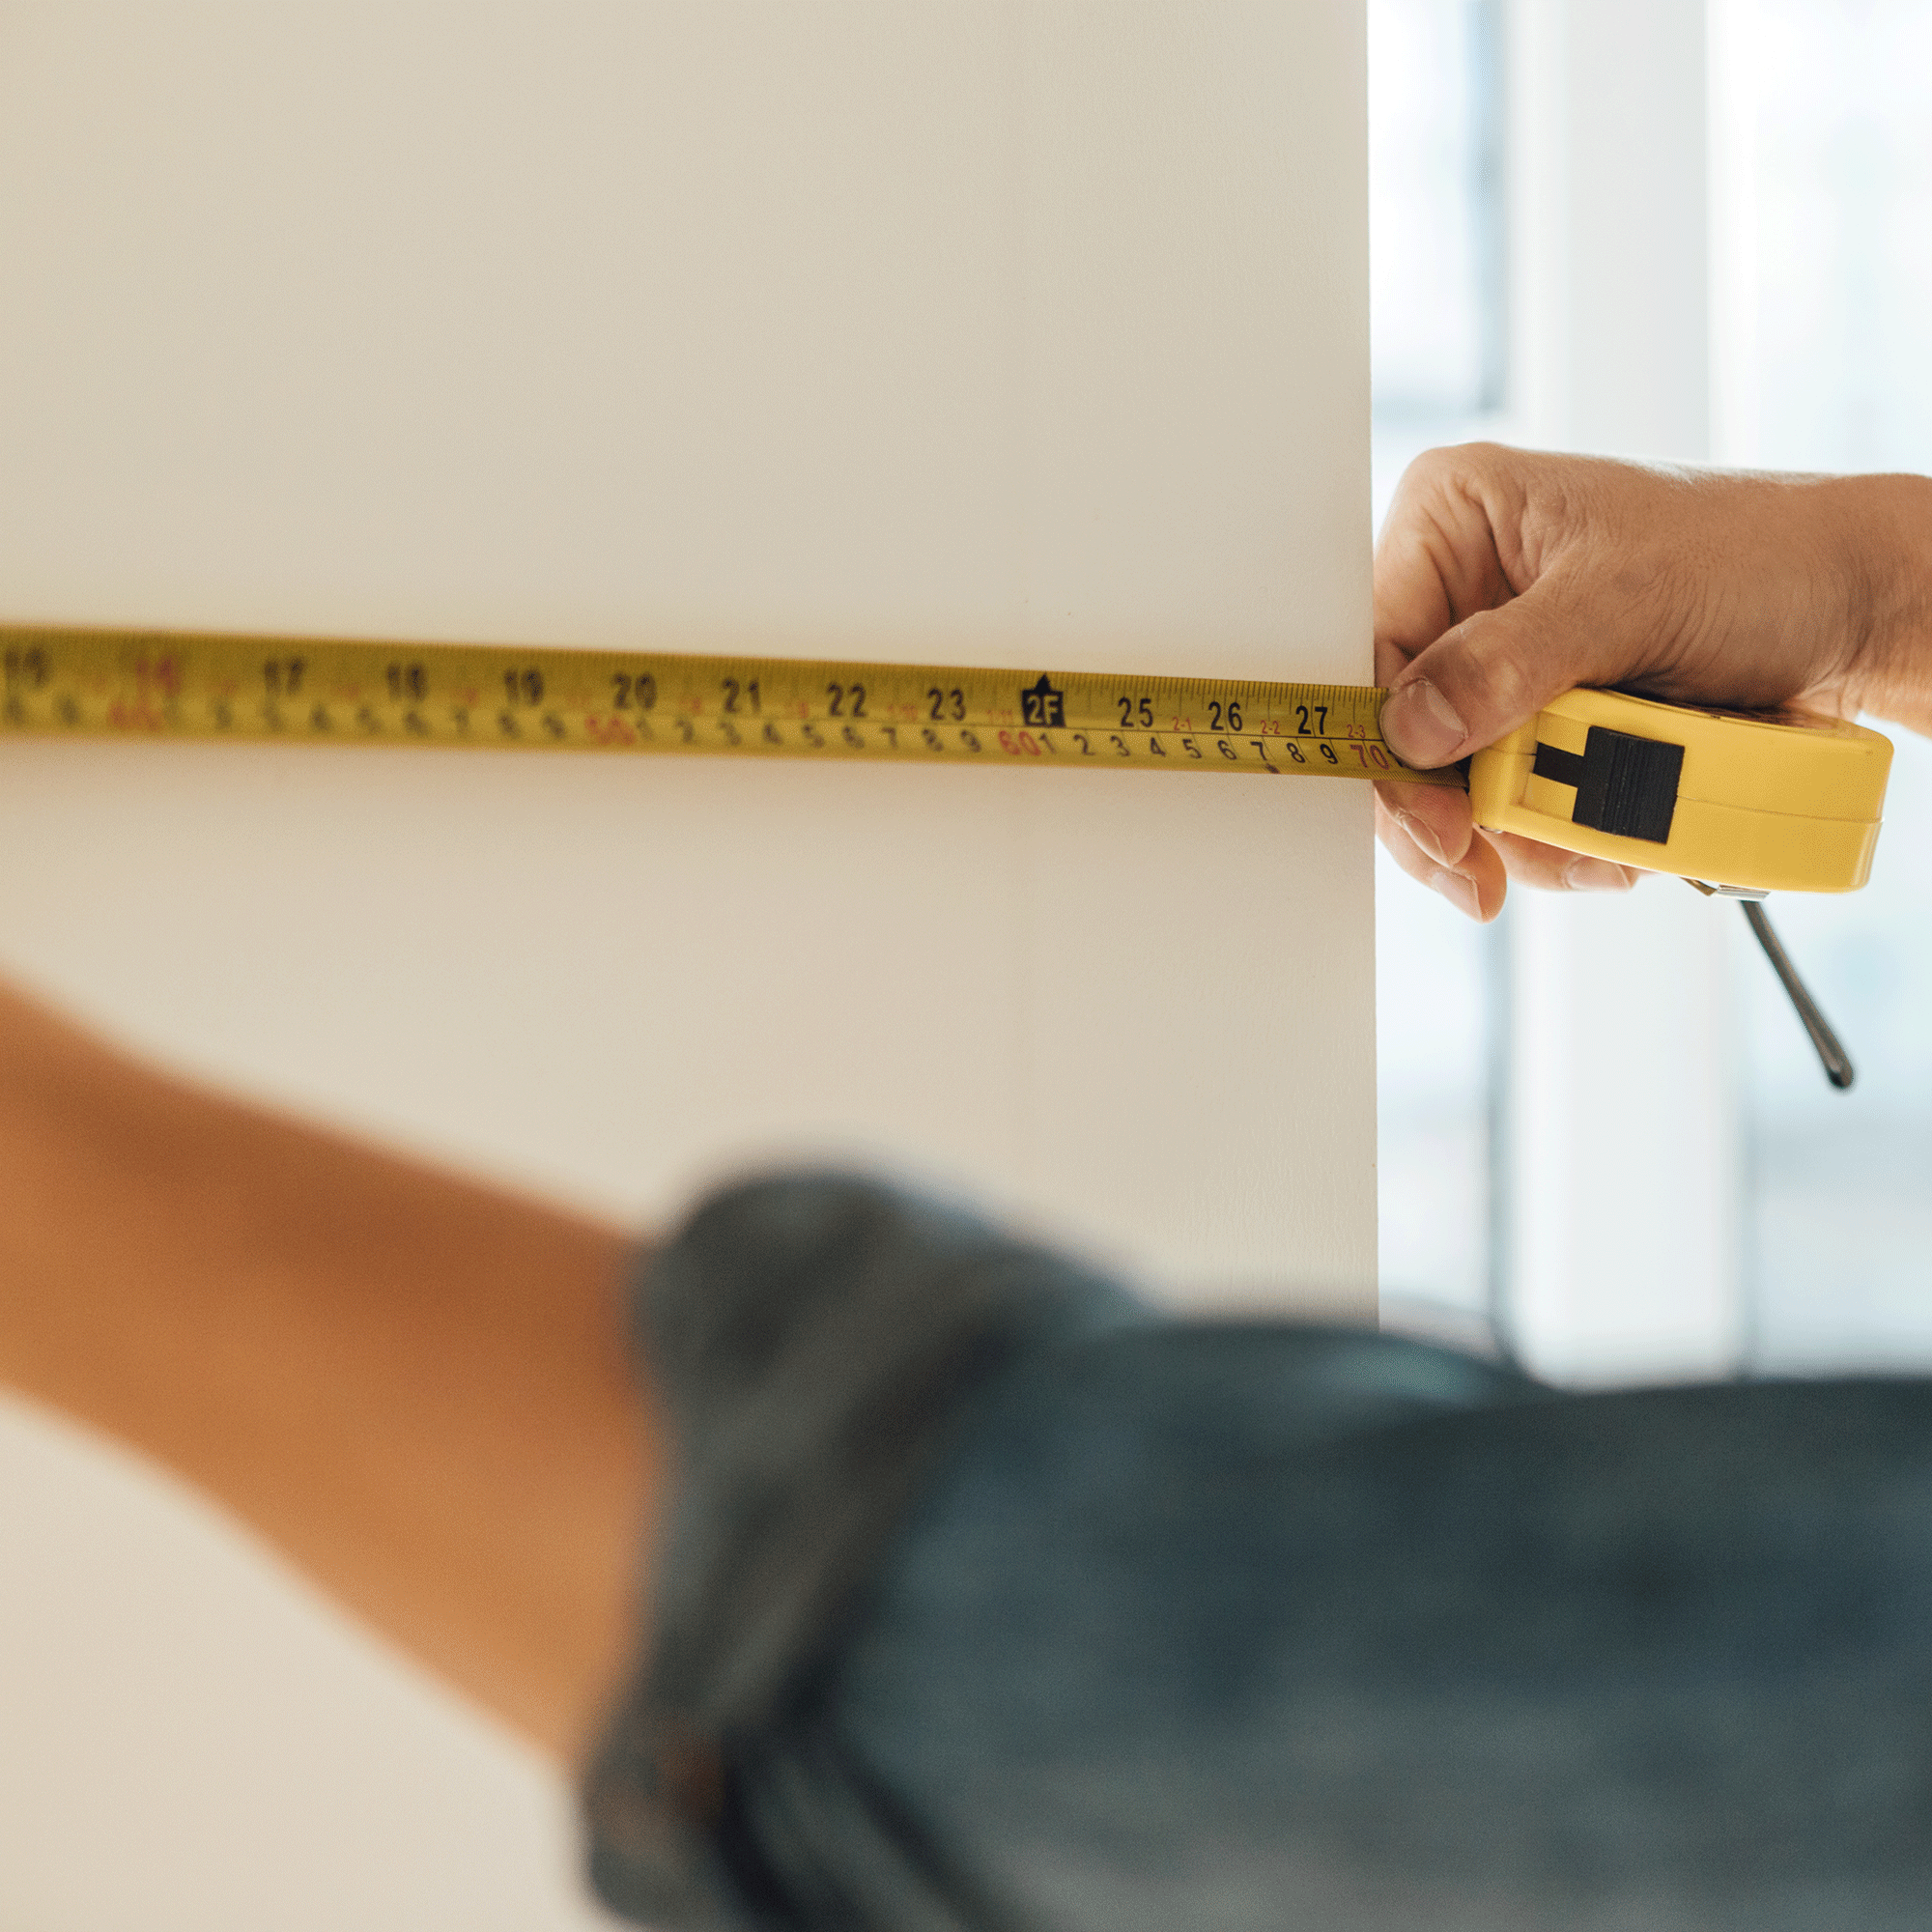 Tape measure against a wall